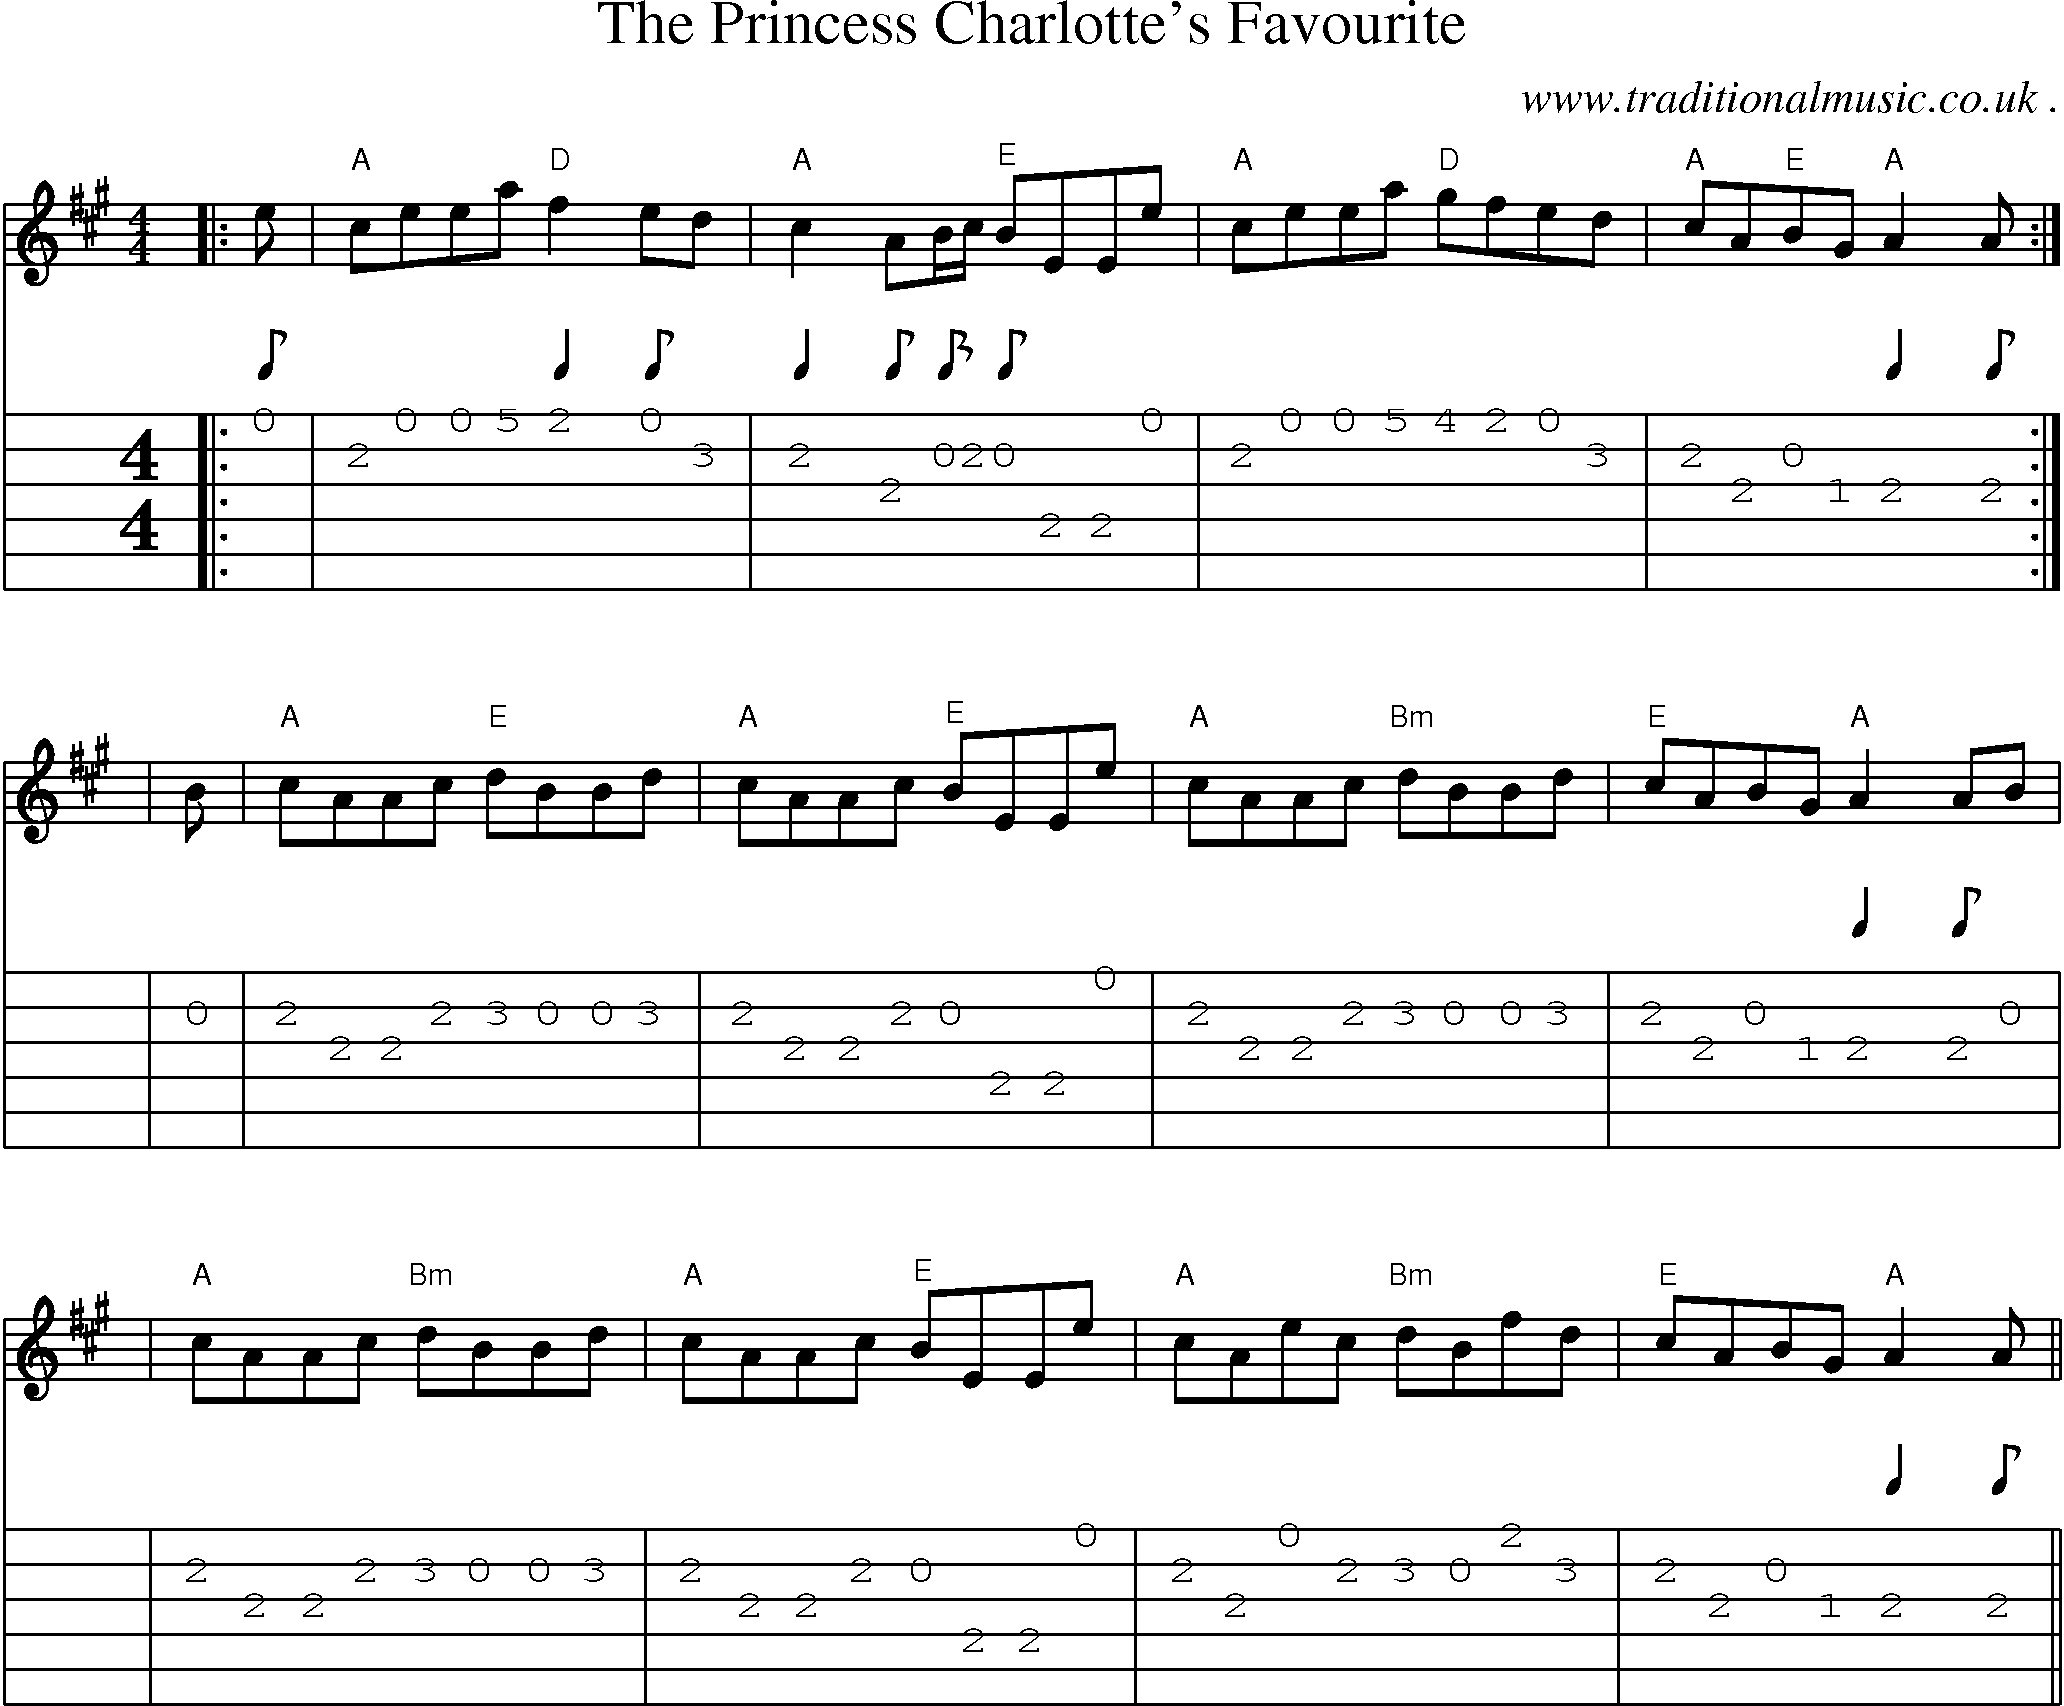 Sheet-music  score, Chords and Guitar Tabs for The Princess Charlottes Favourite